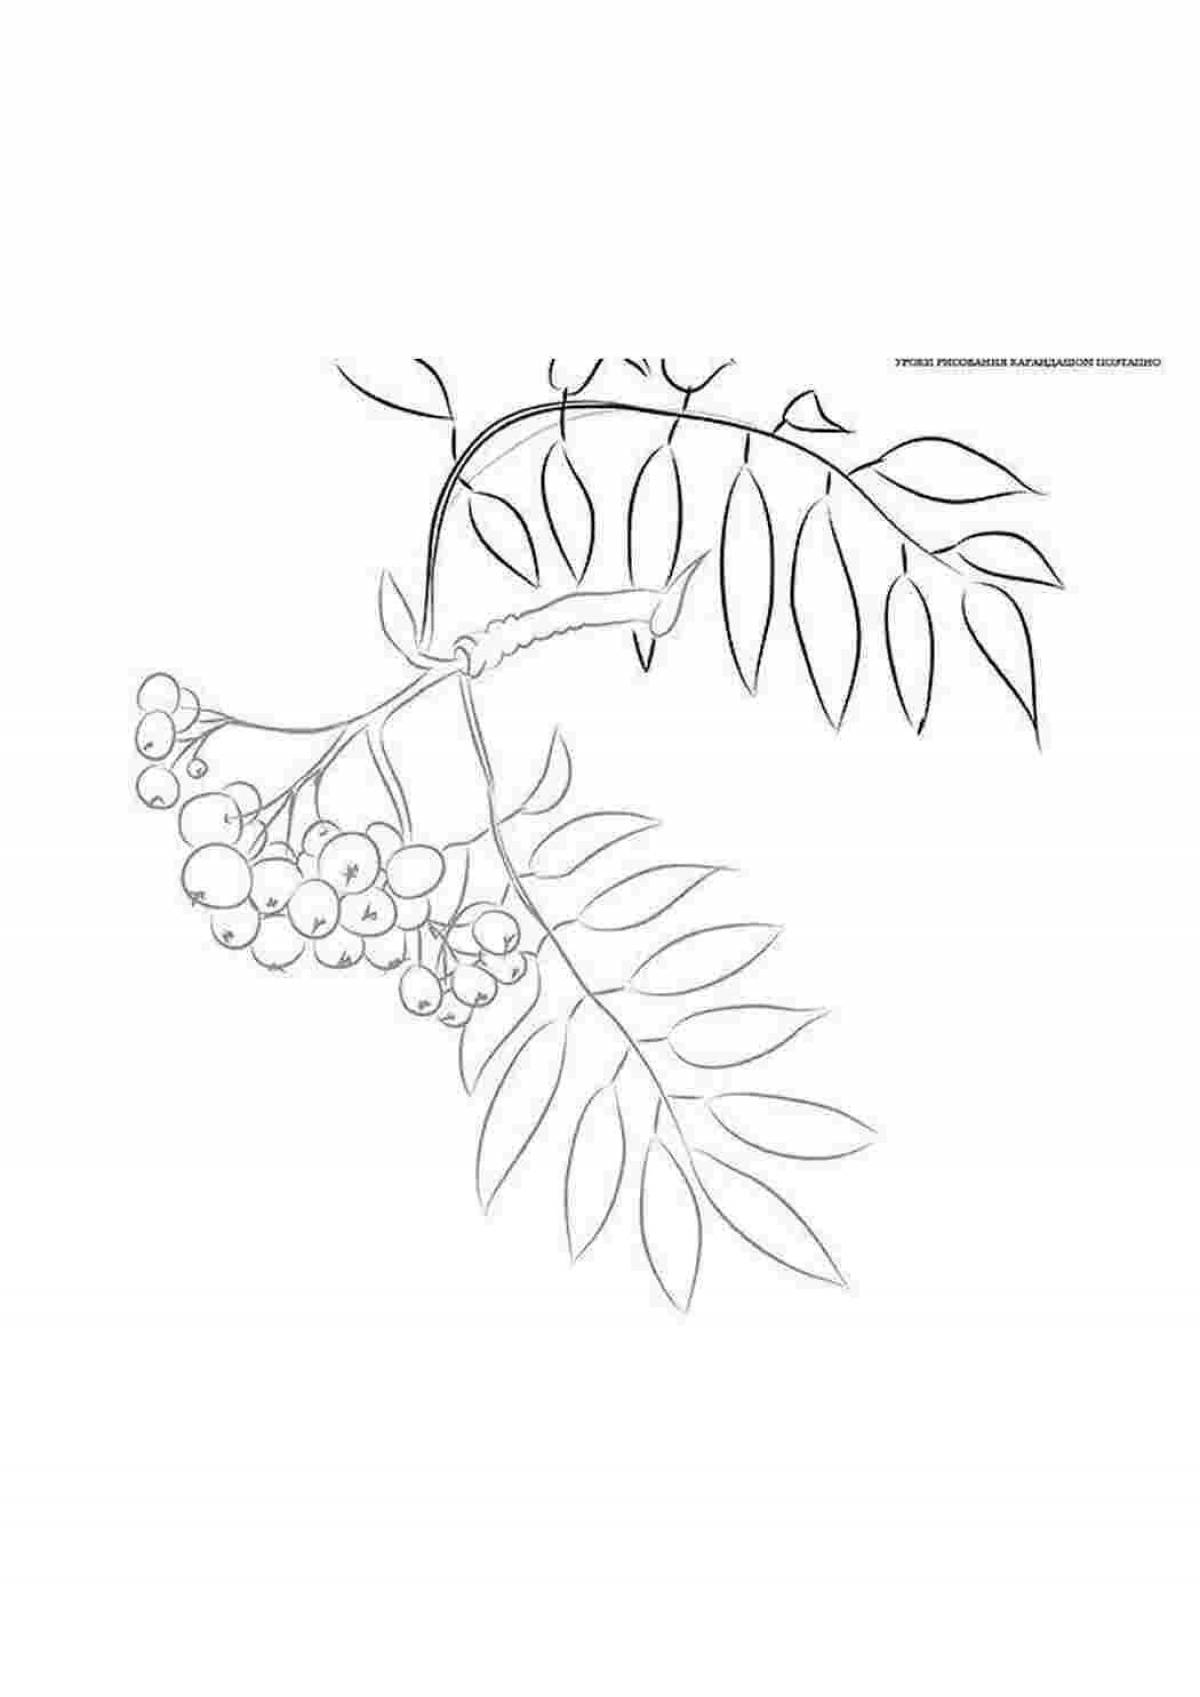 Fancy mountain ash coloring book for kids